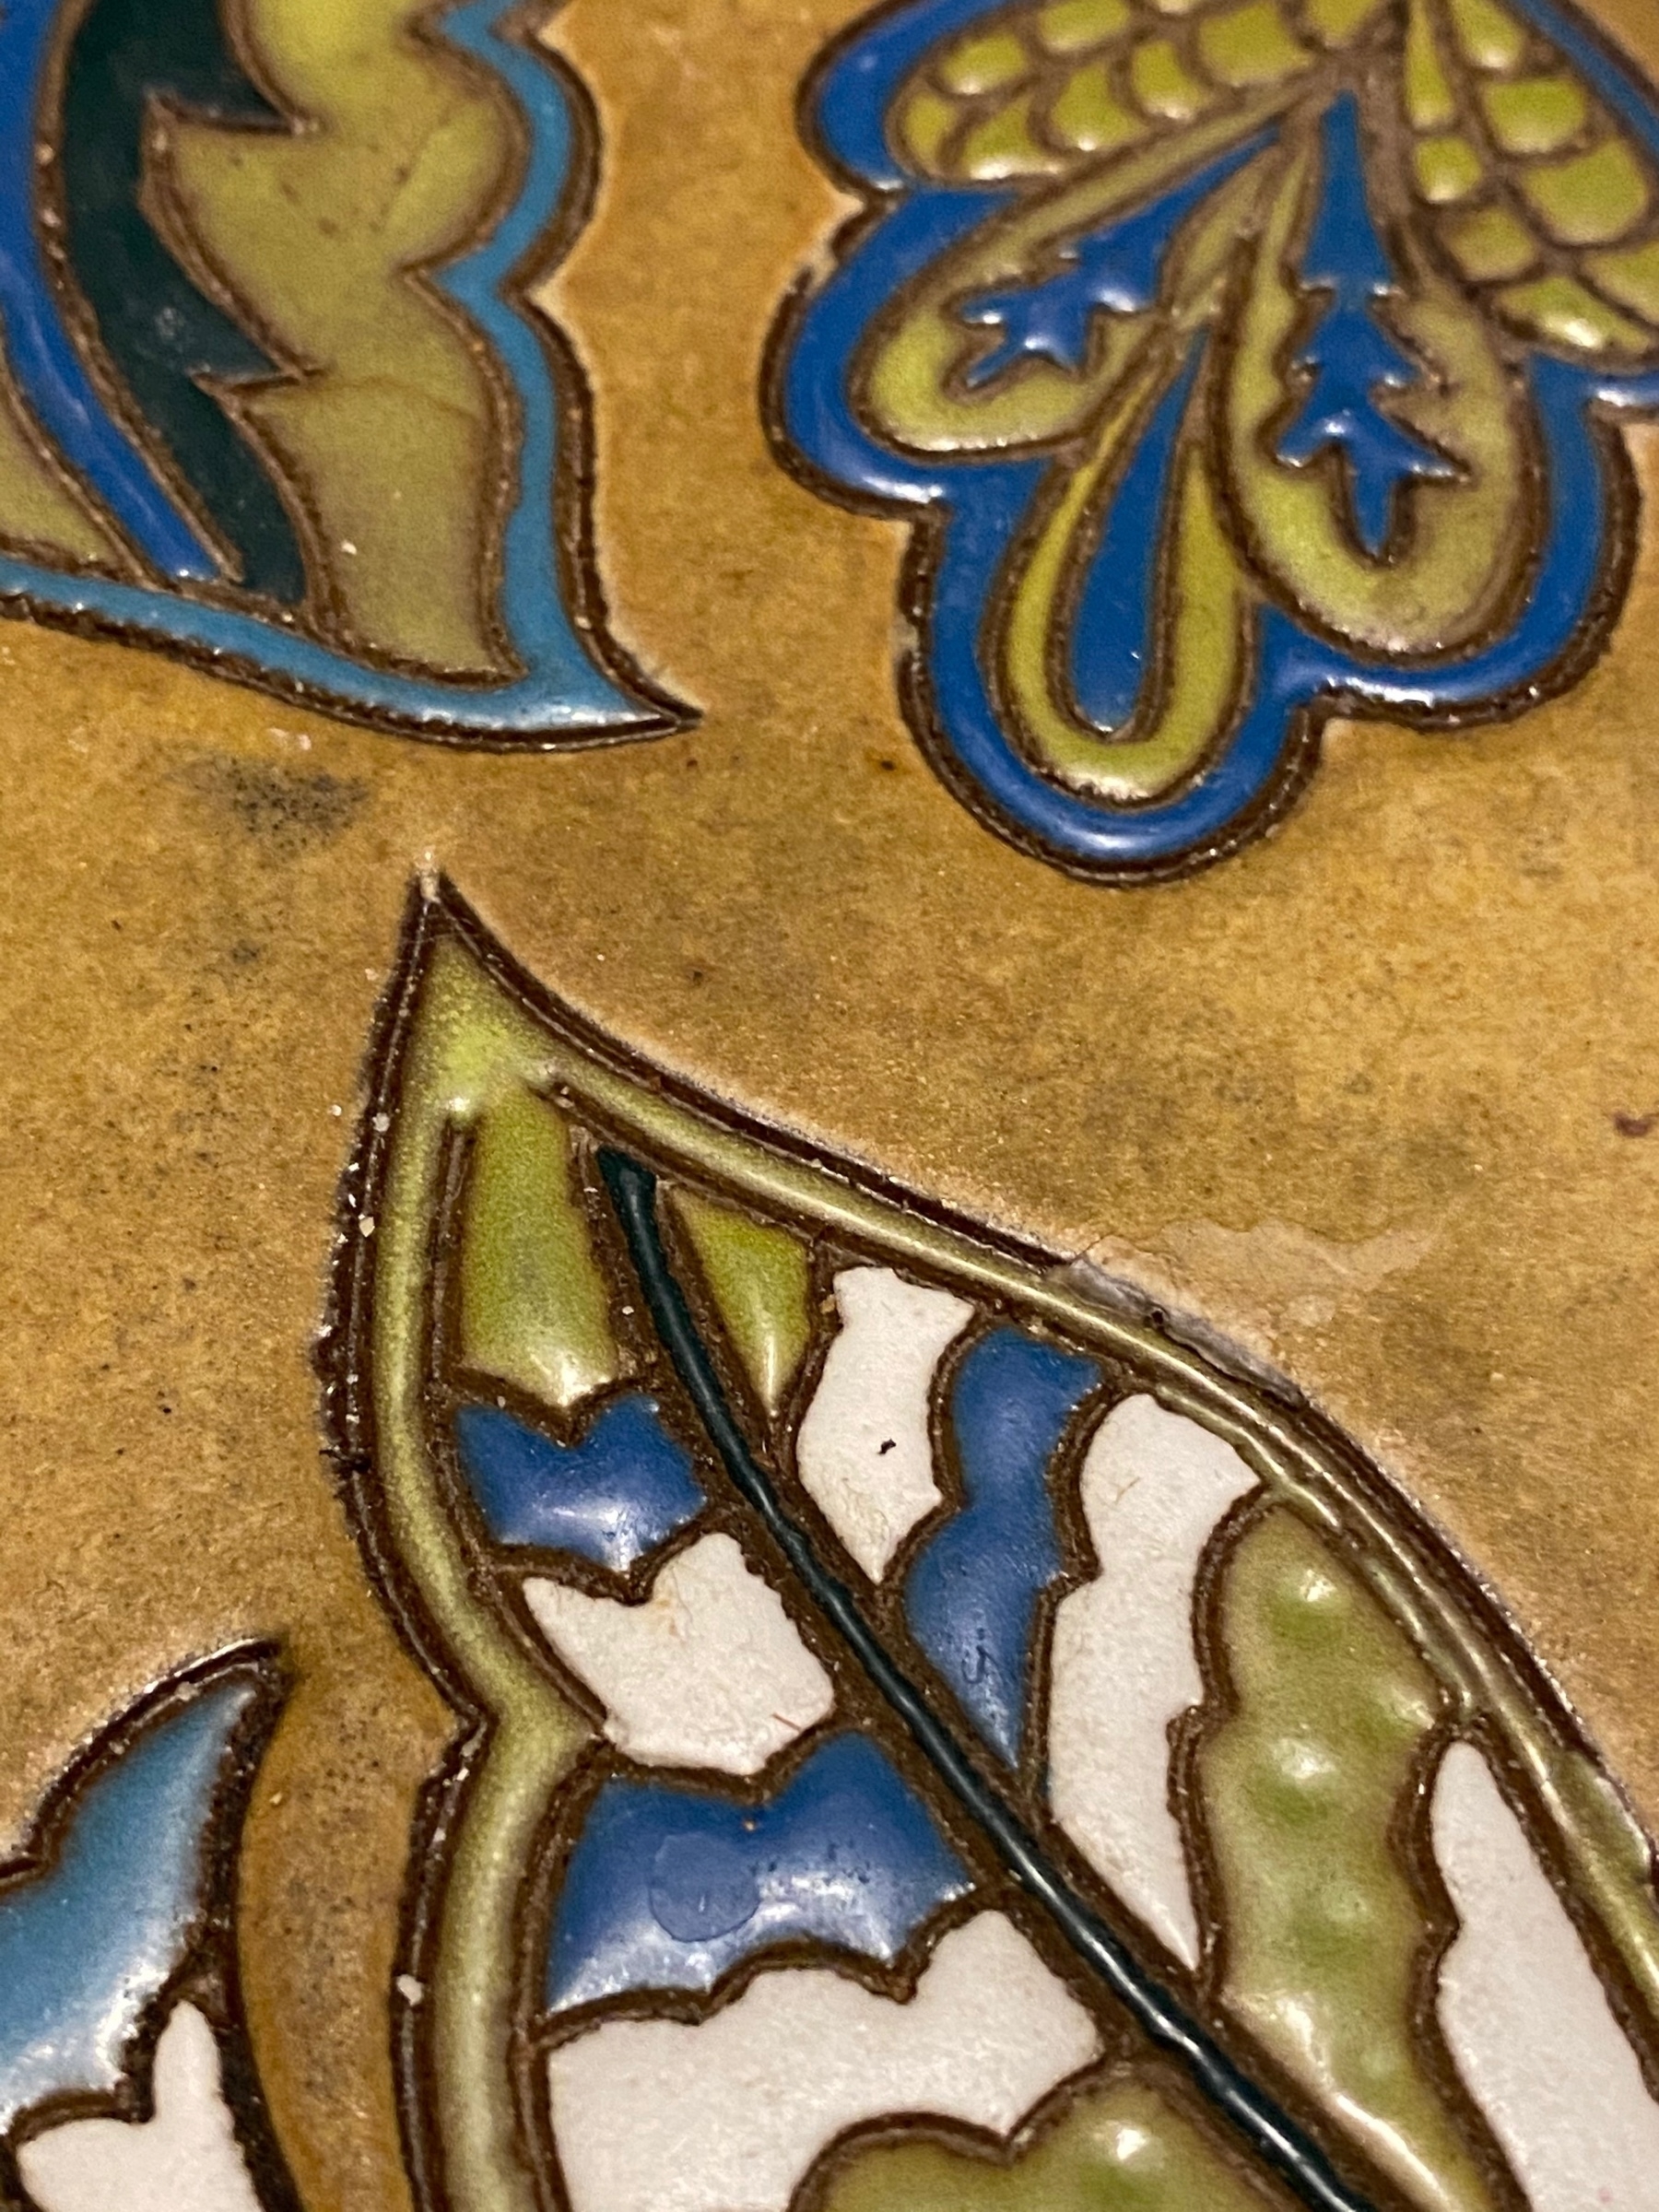 Close up of a ceramic tile with blue, green, and yellow leaf shaped decorations.